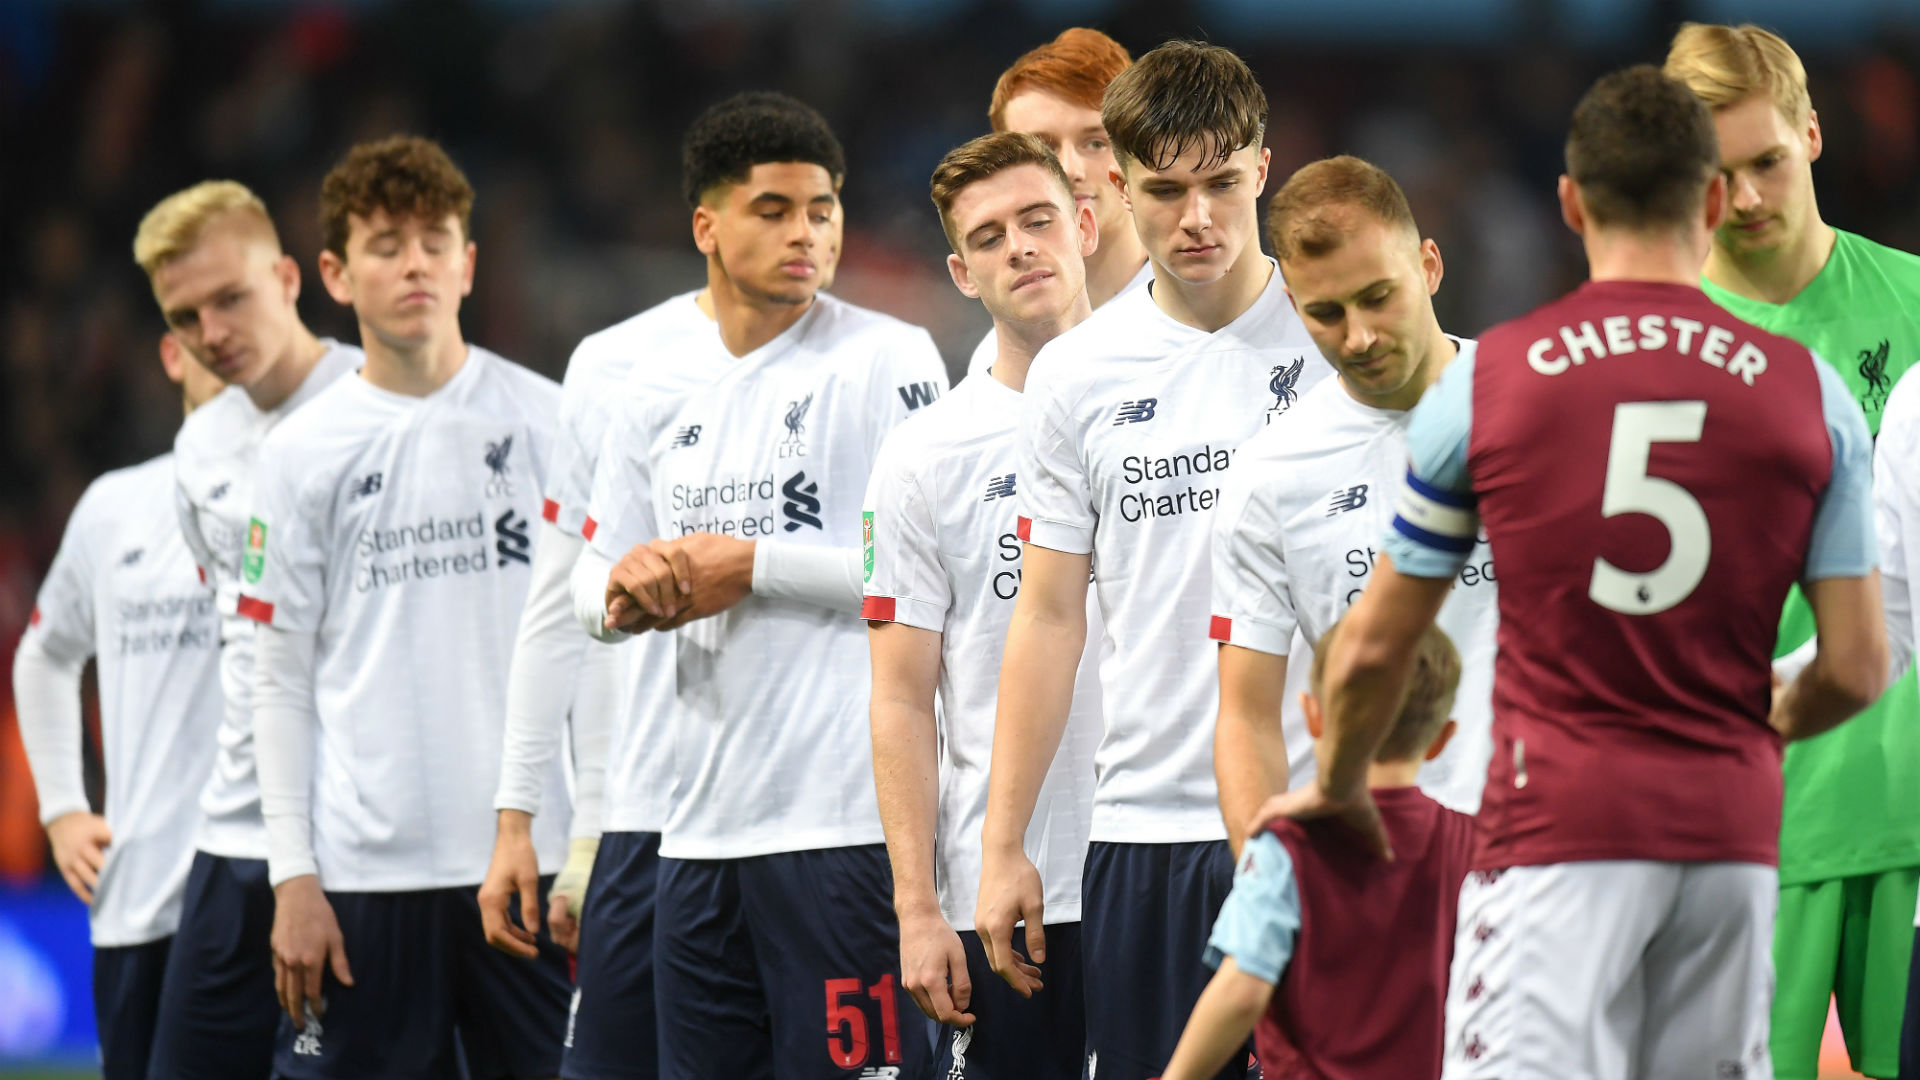 Aston Villa 5-0 Liverpool: Reds' kids crushed as hosts ease through to EFL Cup semi-finals